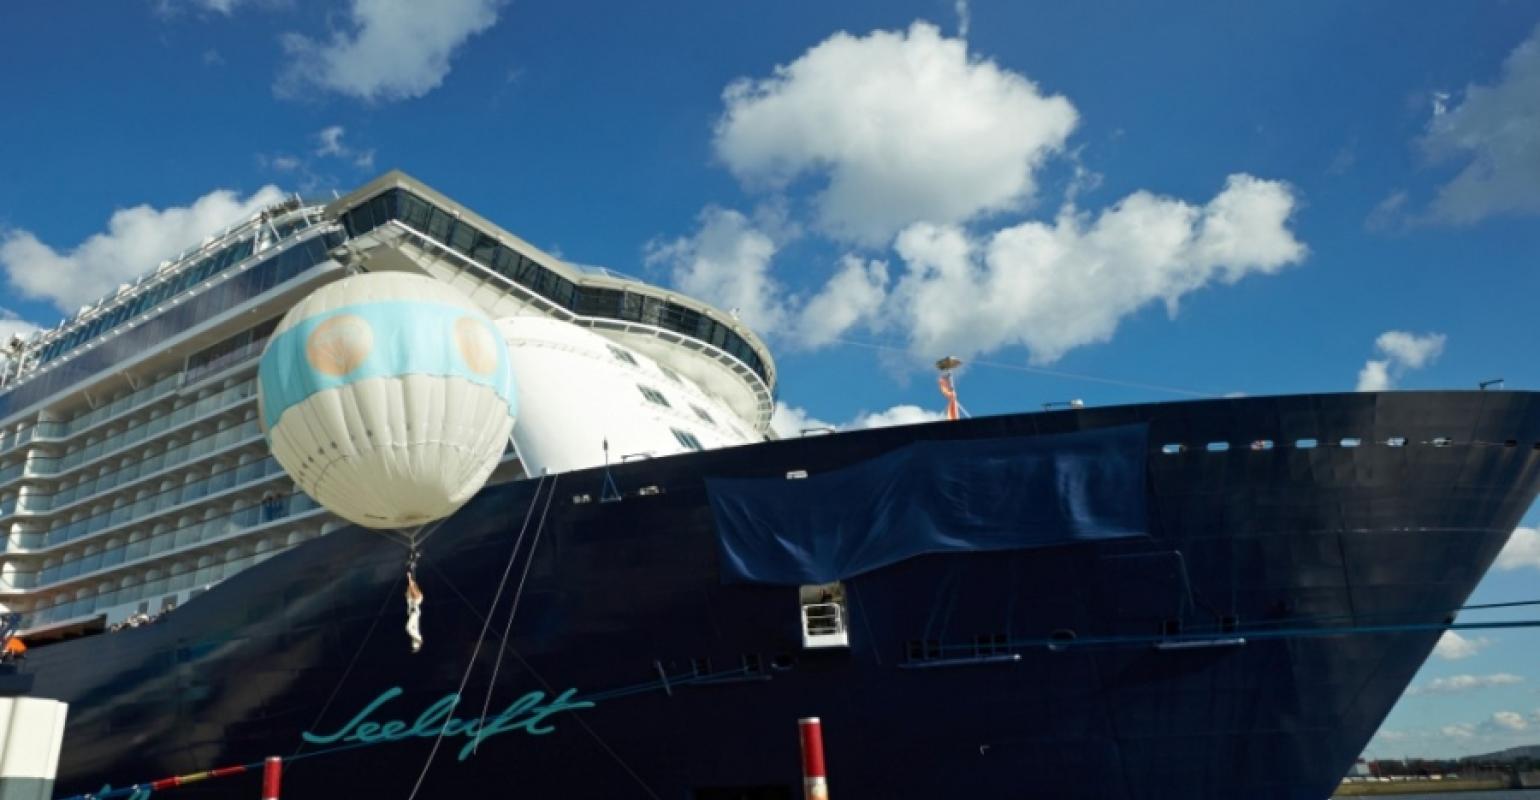 TUI delivering 'exceptional' returns, new ships a 'powerful driver